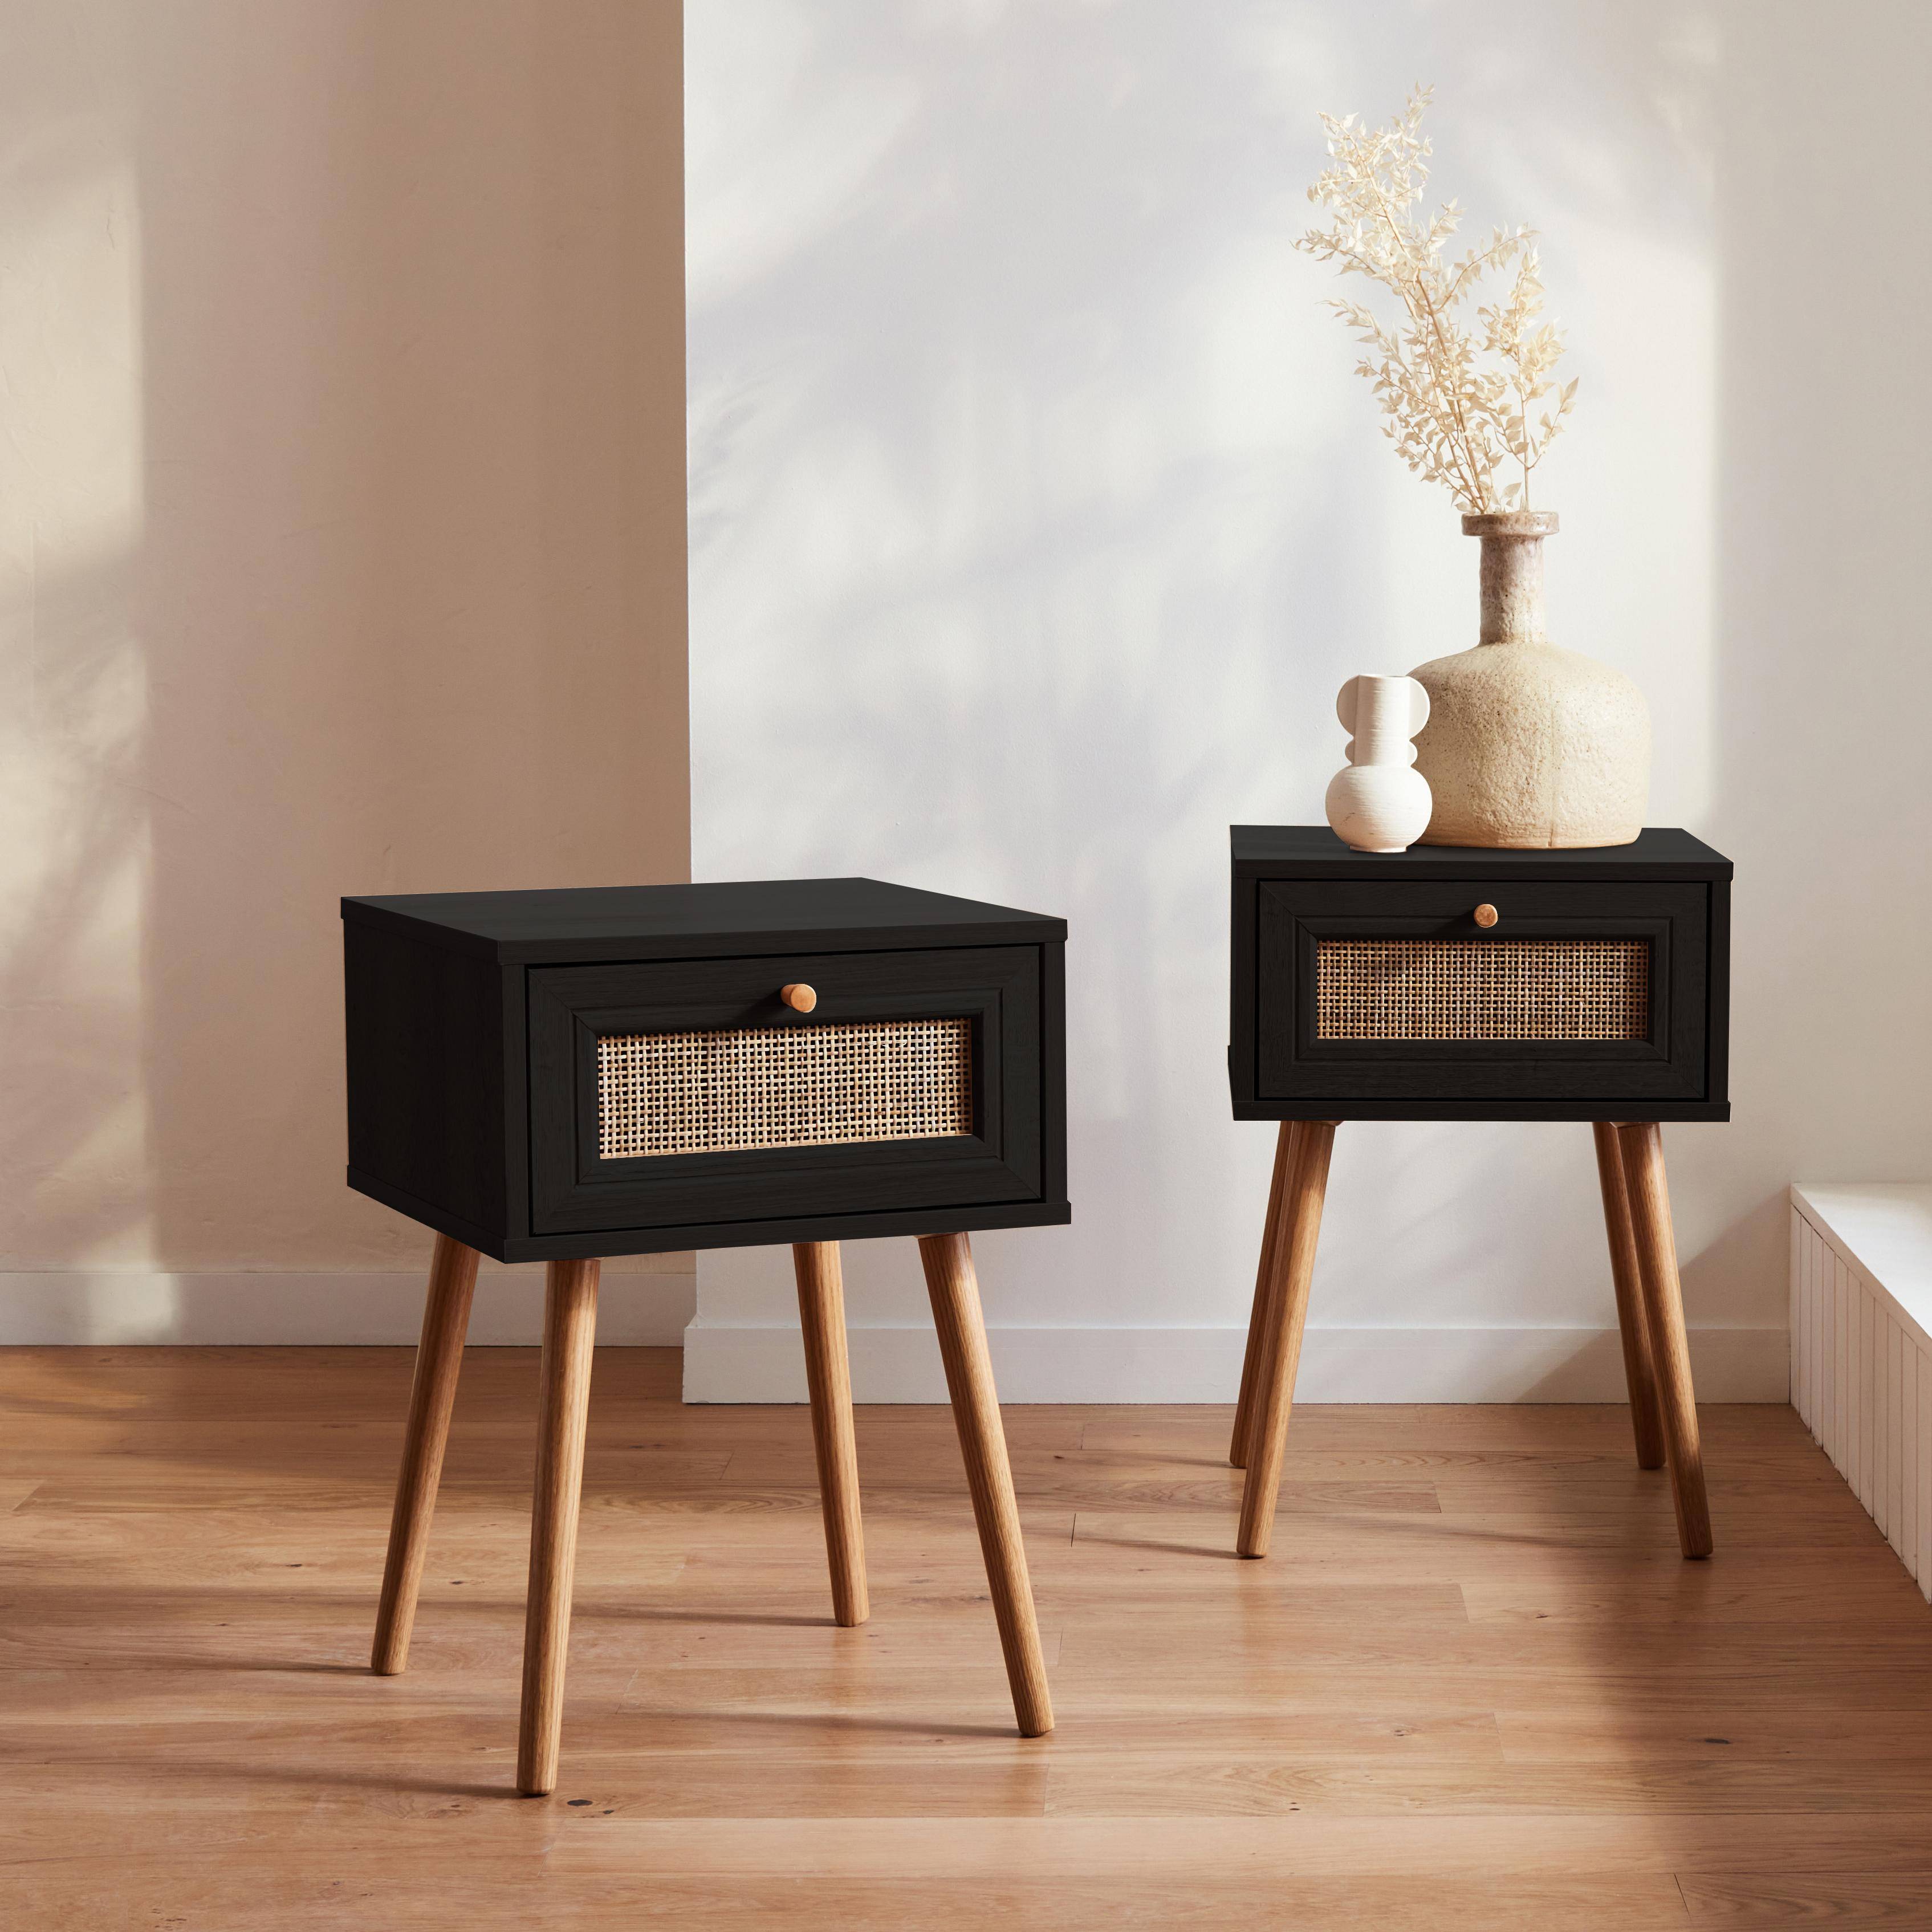 Set of 2 black wood and cane effect bedside tables with 1 drawer,sweeek,Photo1